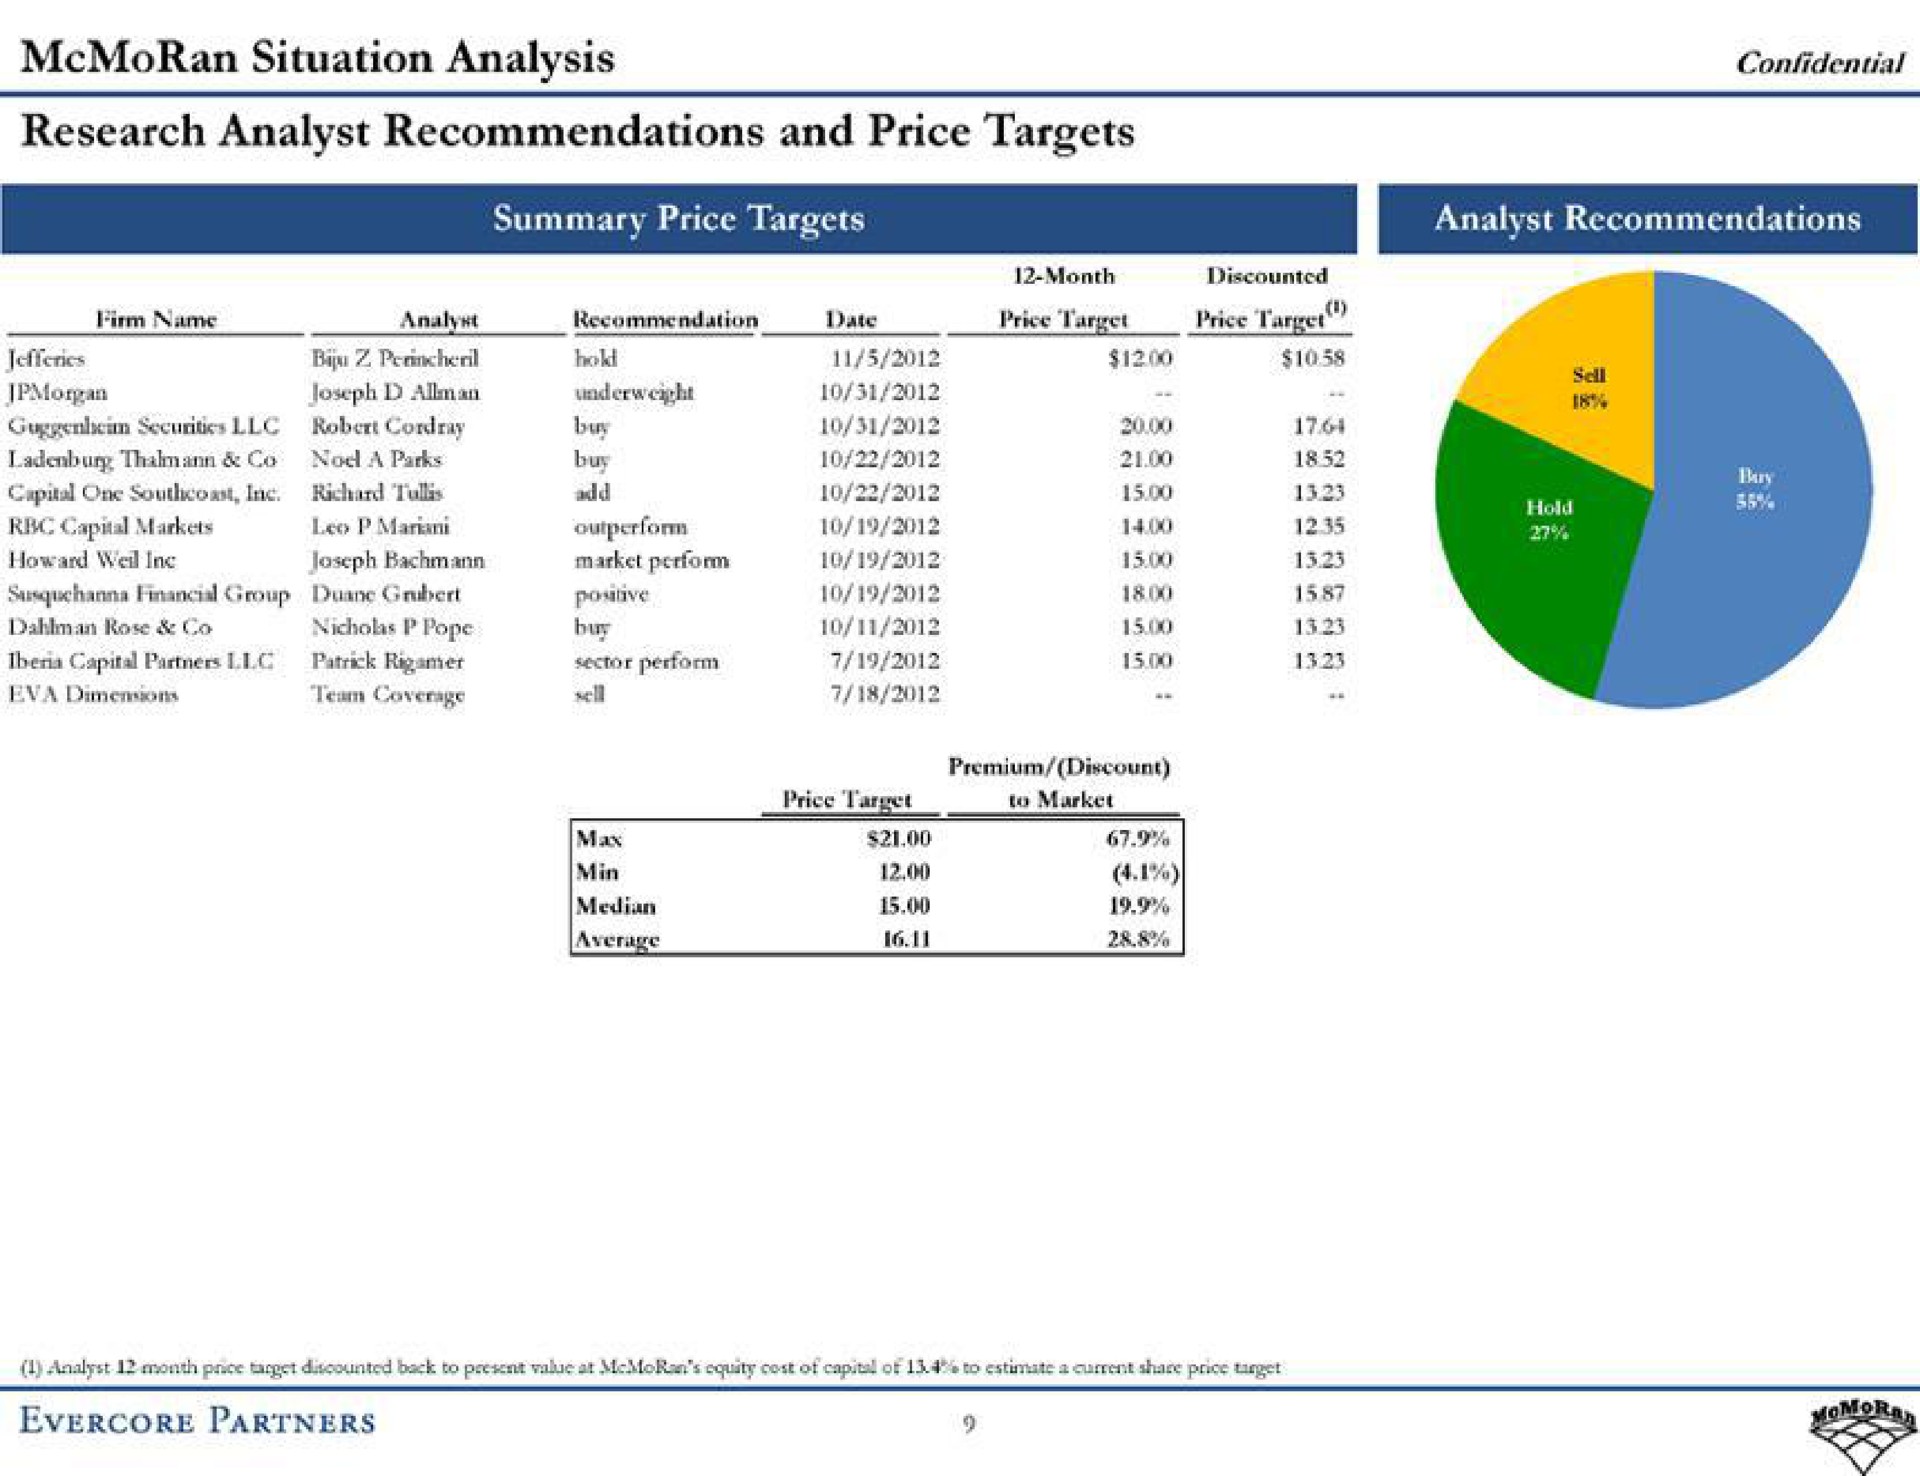 situation analysis confidential research analyst recommendations and price targets partnerss | Evercore